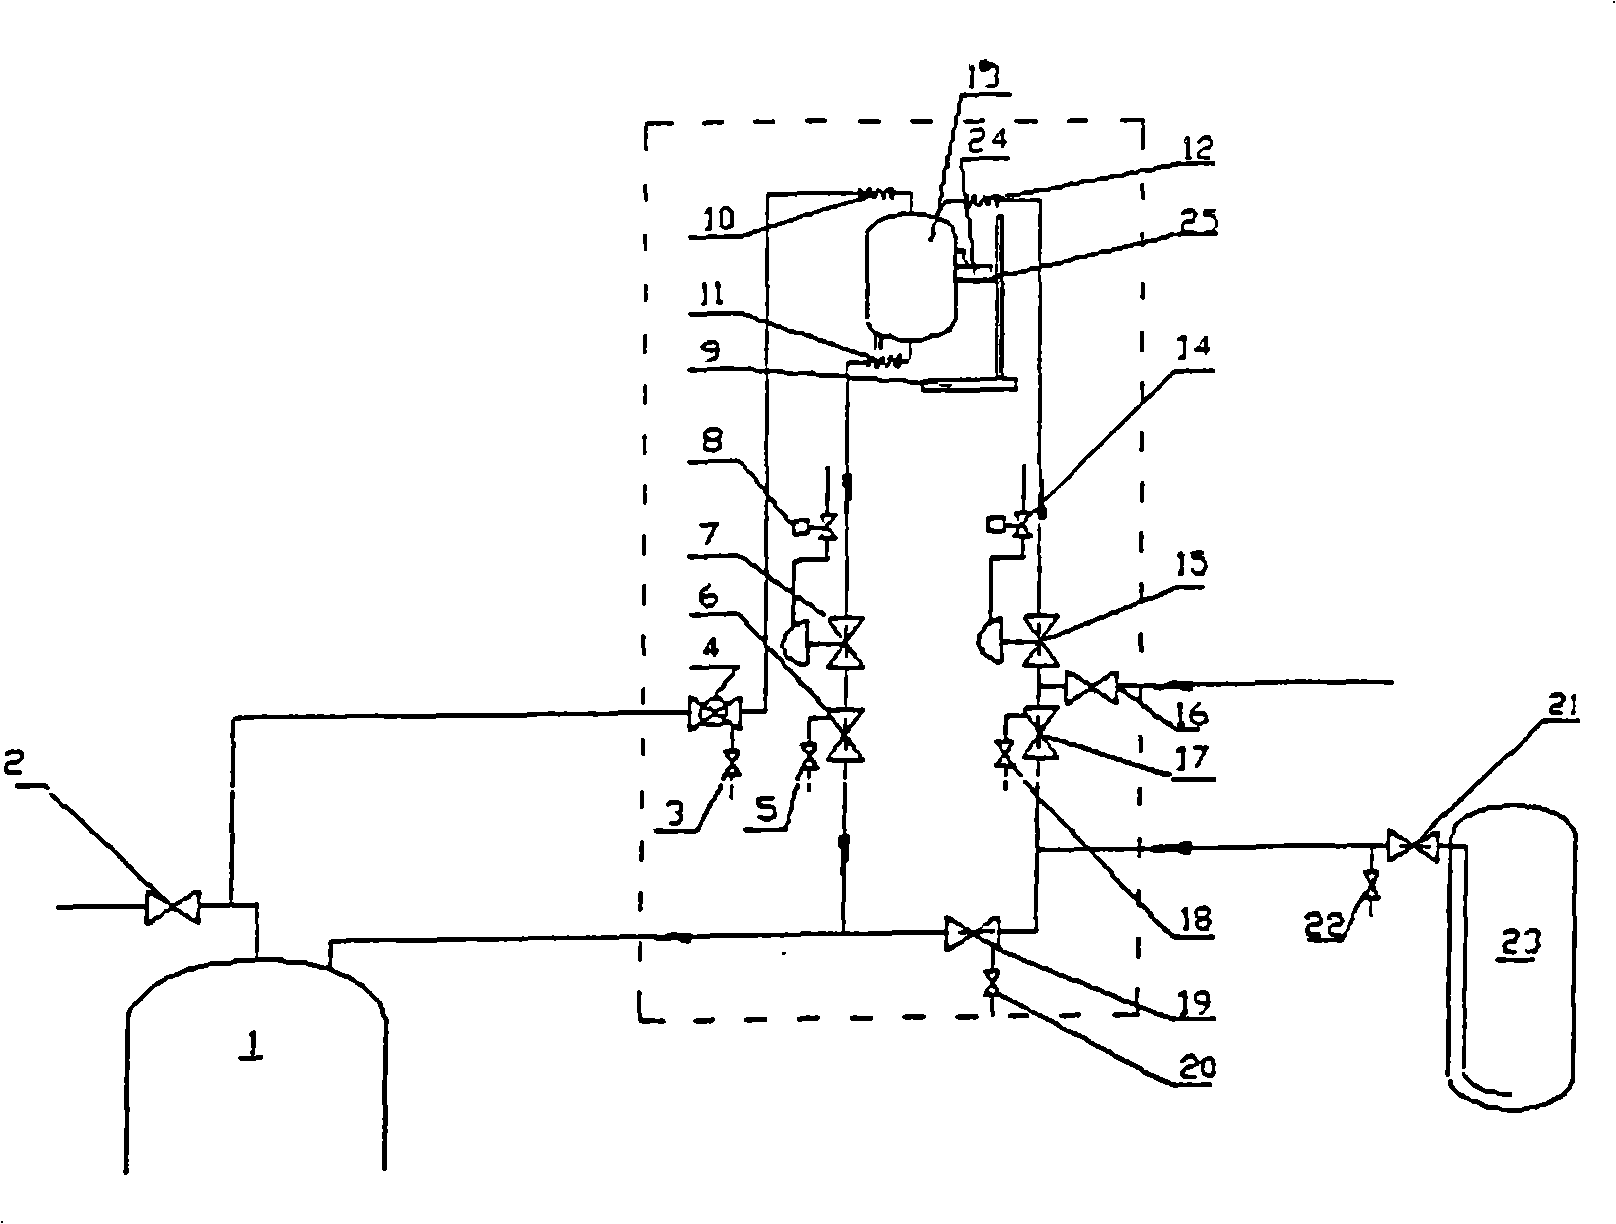 Supplementary food weighing and metering control device